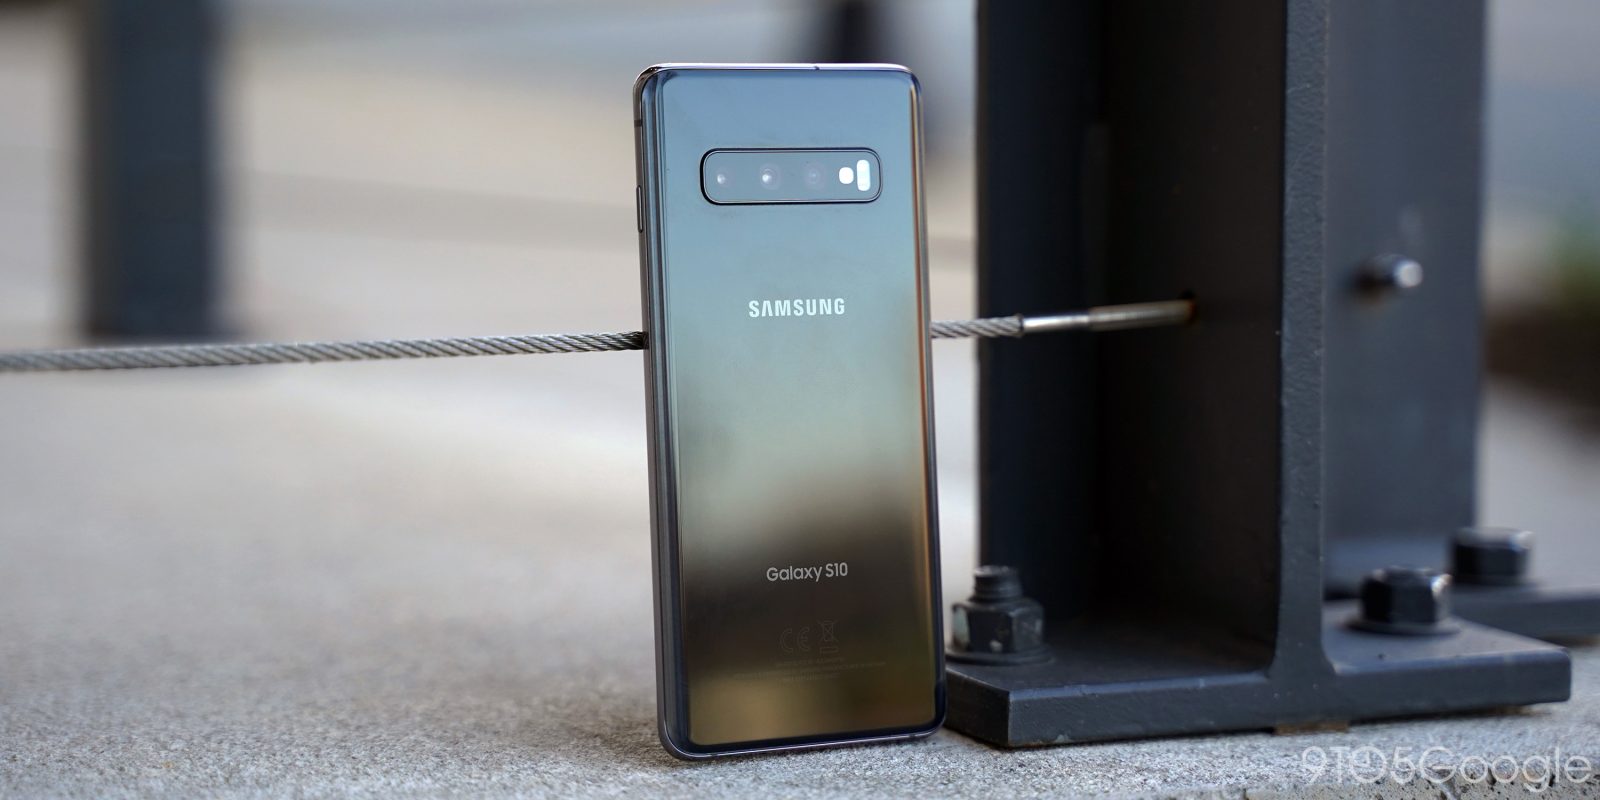 Galaxy S10 One UI 4.0 beta rolling out in South Korea